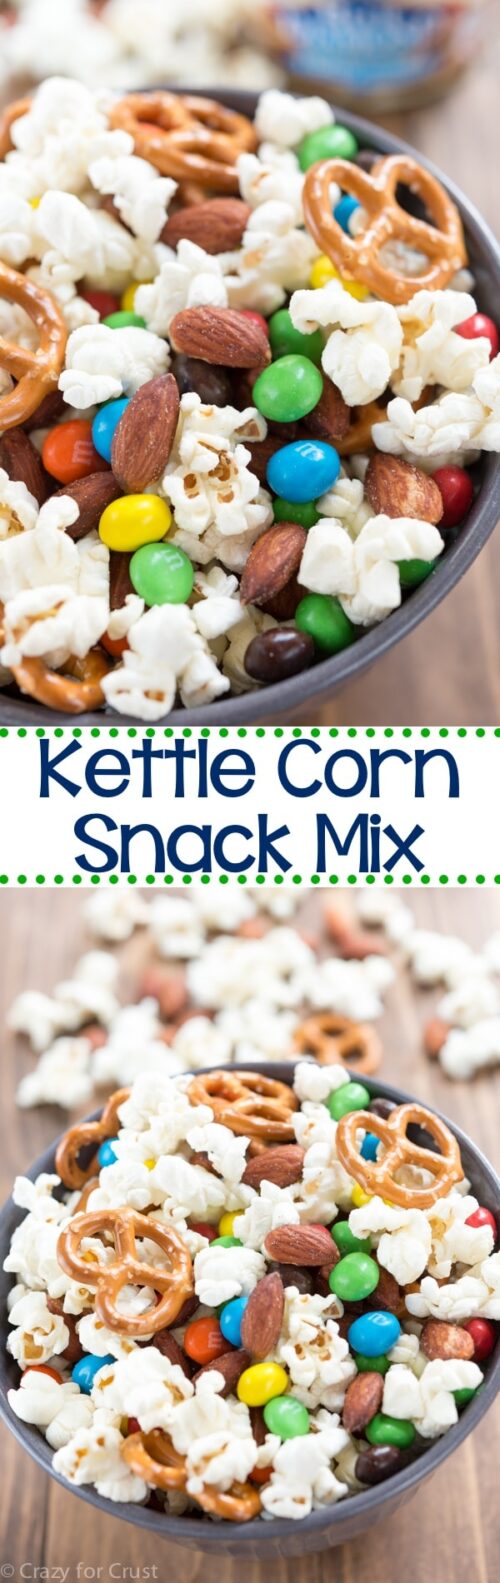 Kettle Corn Snack Mix - Crazy for Crust